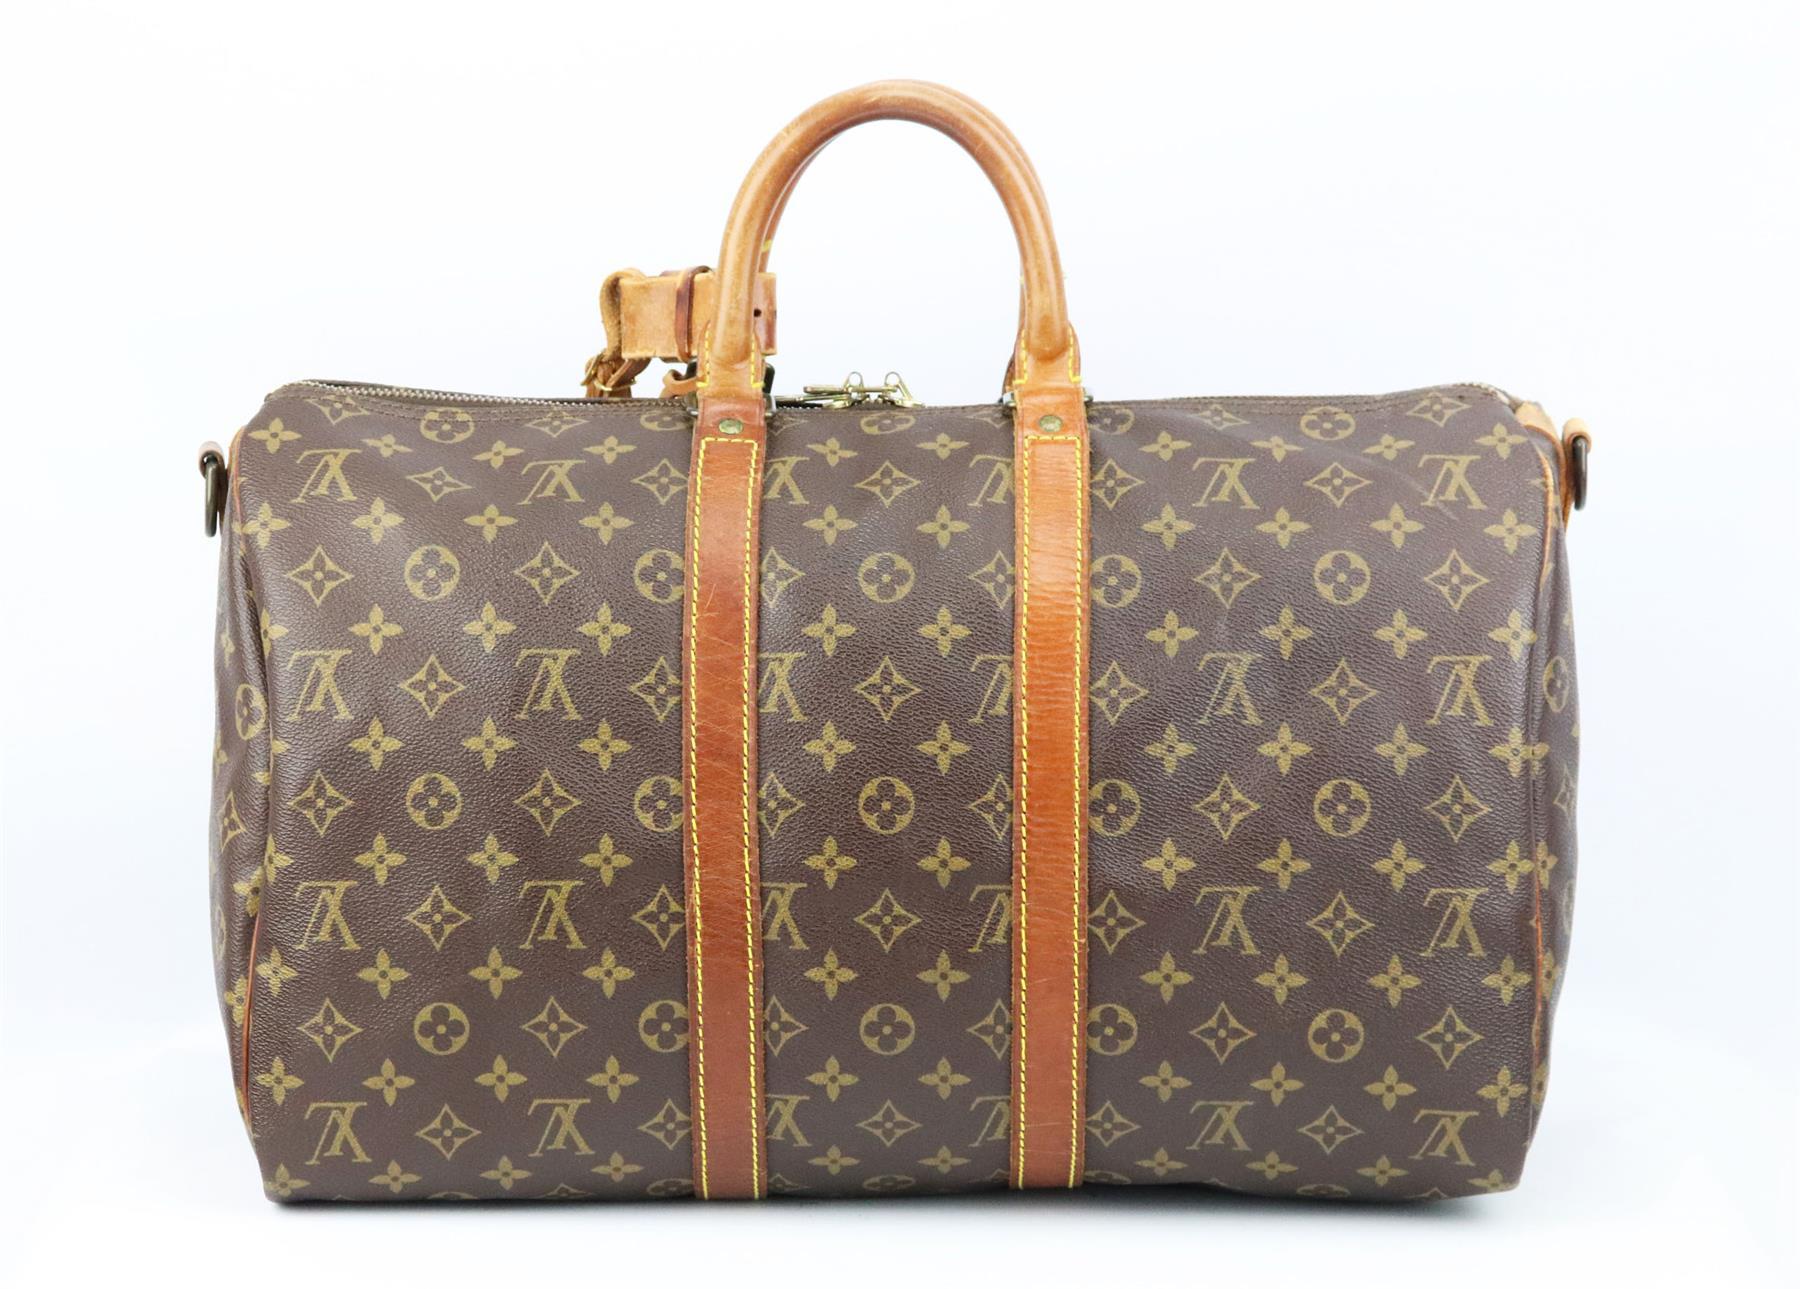 This ‘Keepall 45’ travel bag by Louis Vuitton is inspired by a classic duffle bag re-imagined and customised by Medium Mare, crafted from brown and beige monogrammed coated canvas and lined in blue canvas with brown leather handles and shoulder